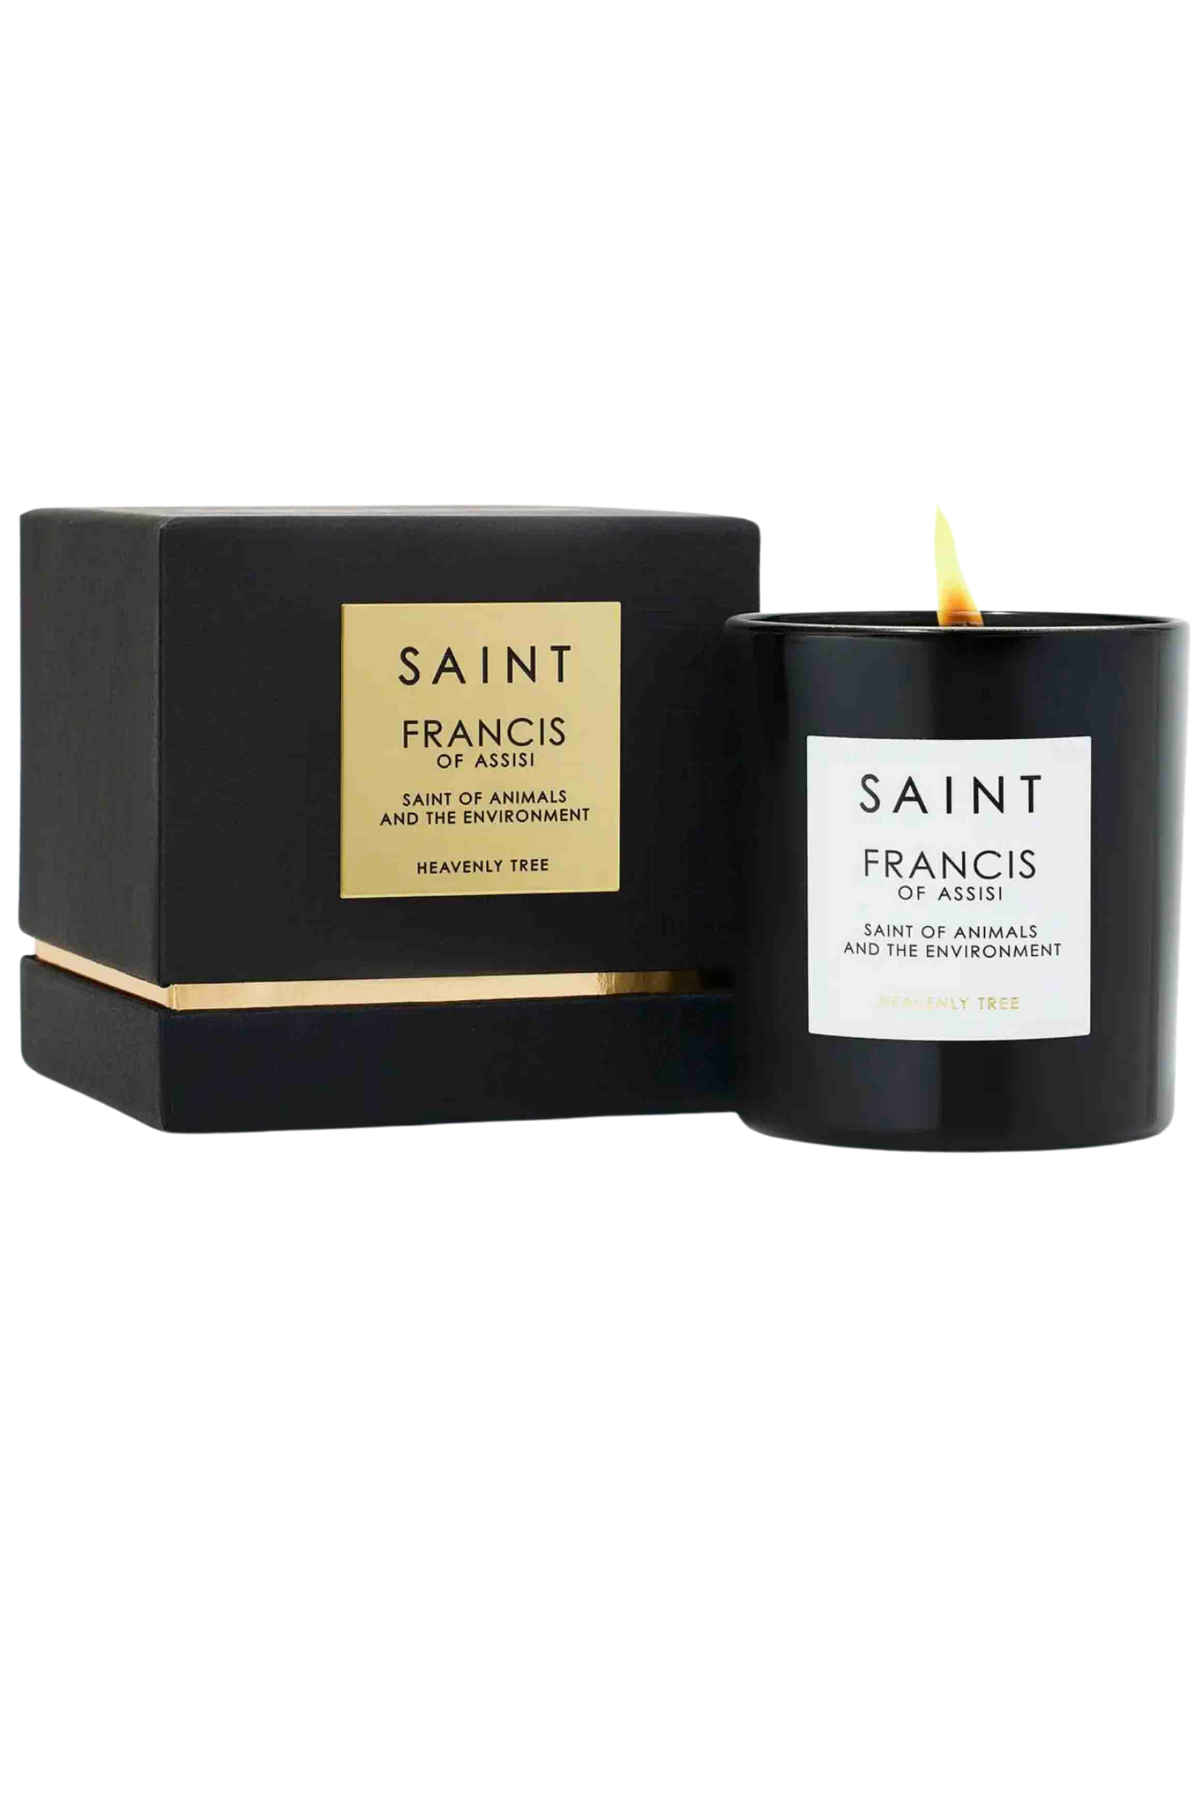 Saint Francis of Assisi Candle by Saint with box that it is packaged in